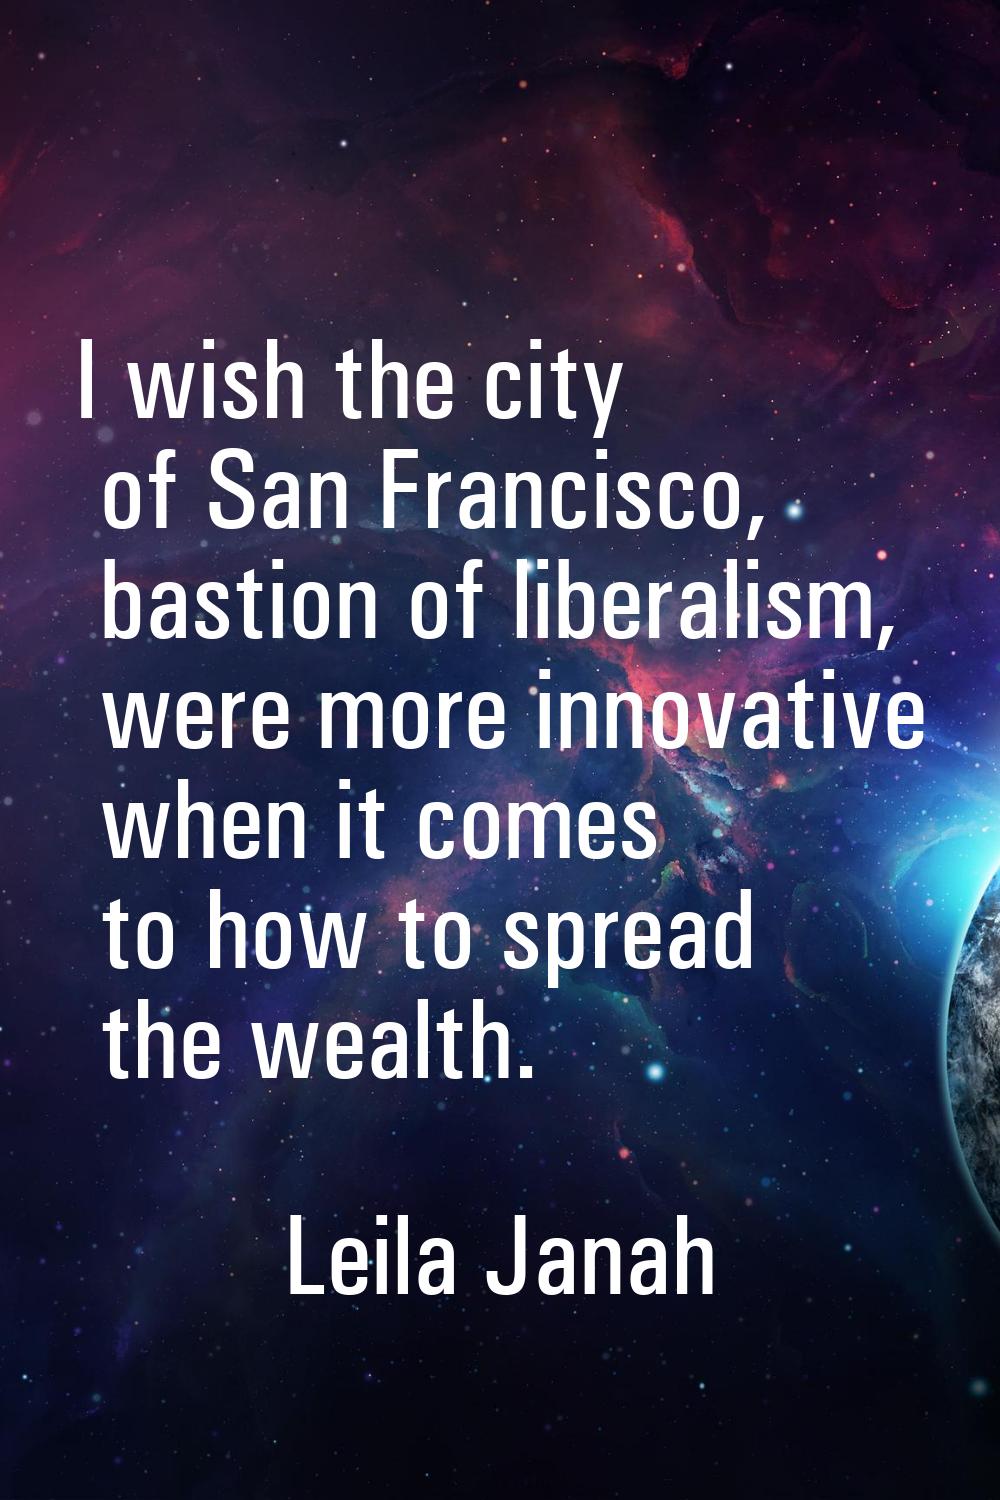 I wish the city of San Francisco, bastion of liberalism, were more innovative when it comes to how 